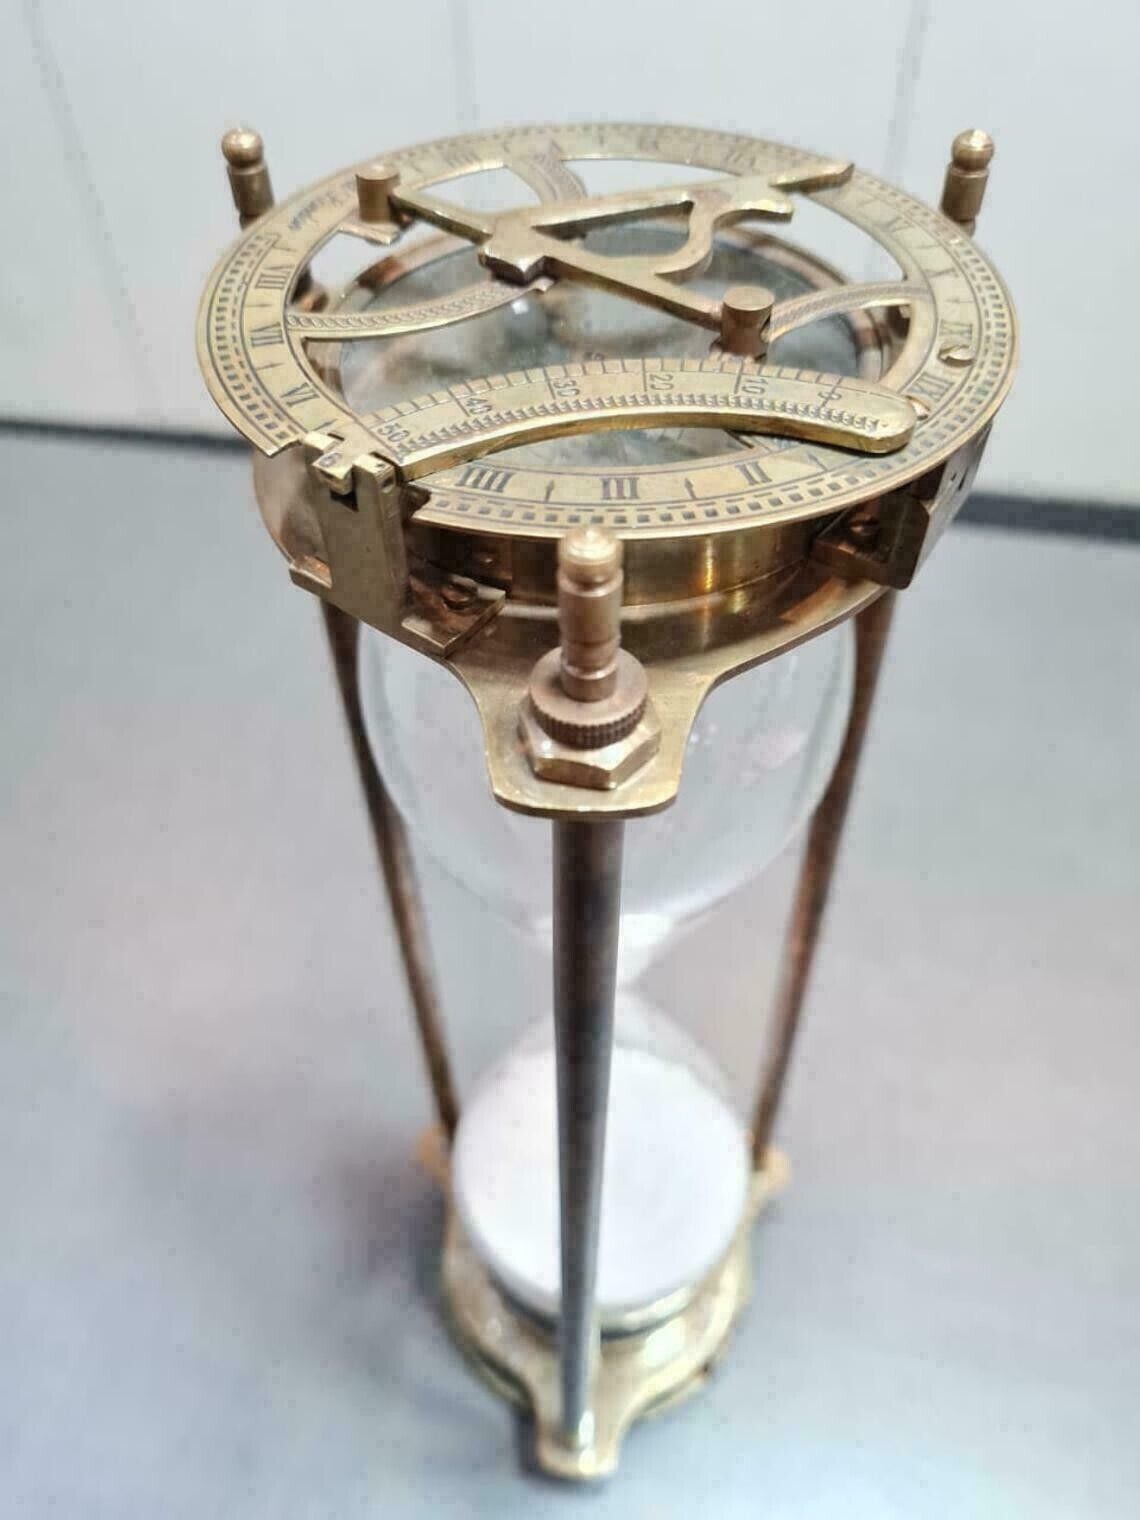 vintage maritime brass sand timer hourglass with sundial compass on top